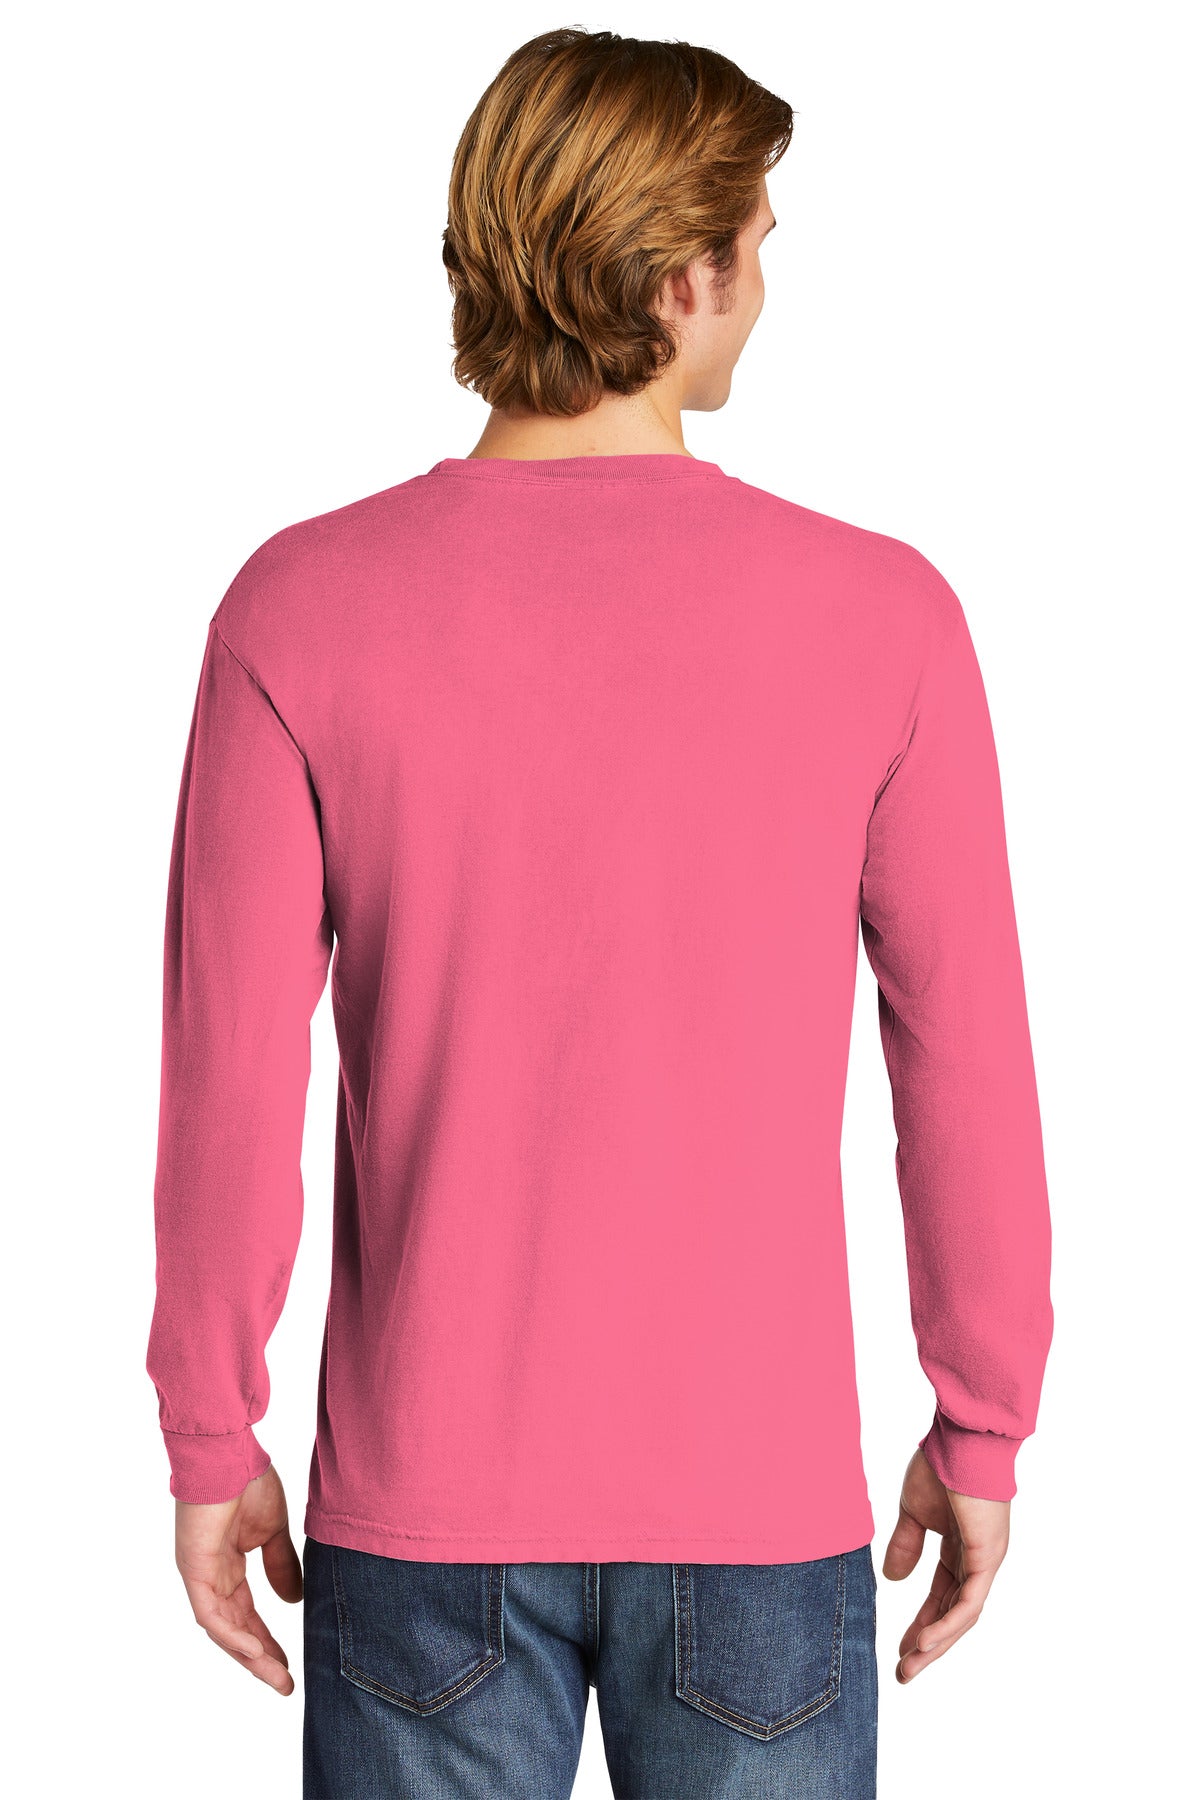 COMFORT COLORS ® Heavyweight Ring Spun Long Sleeve Tee. 6014 [Crunchberry] - DFW Impression